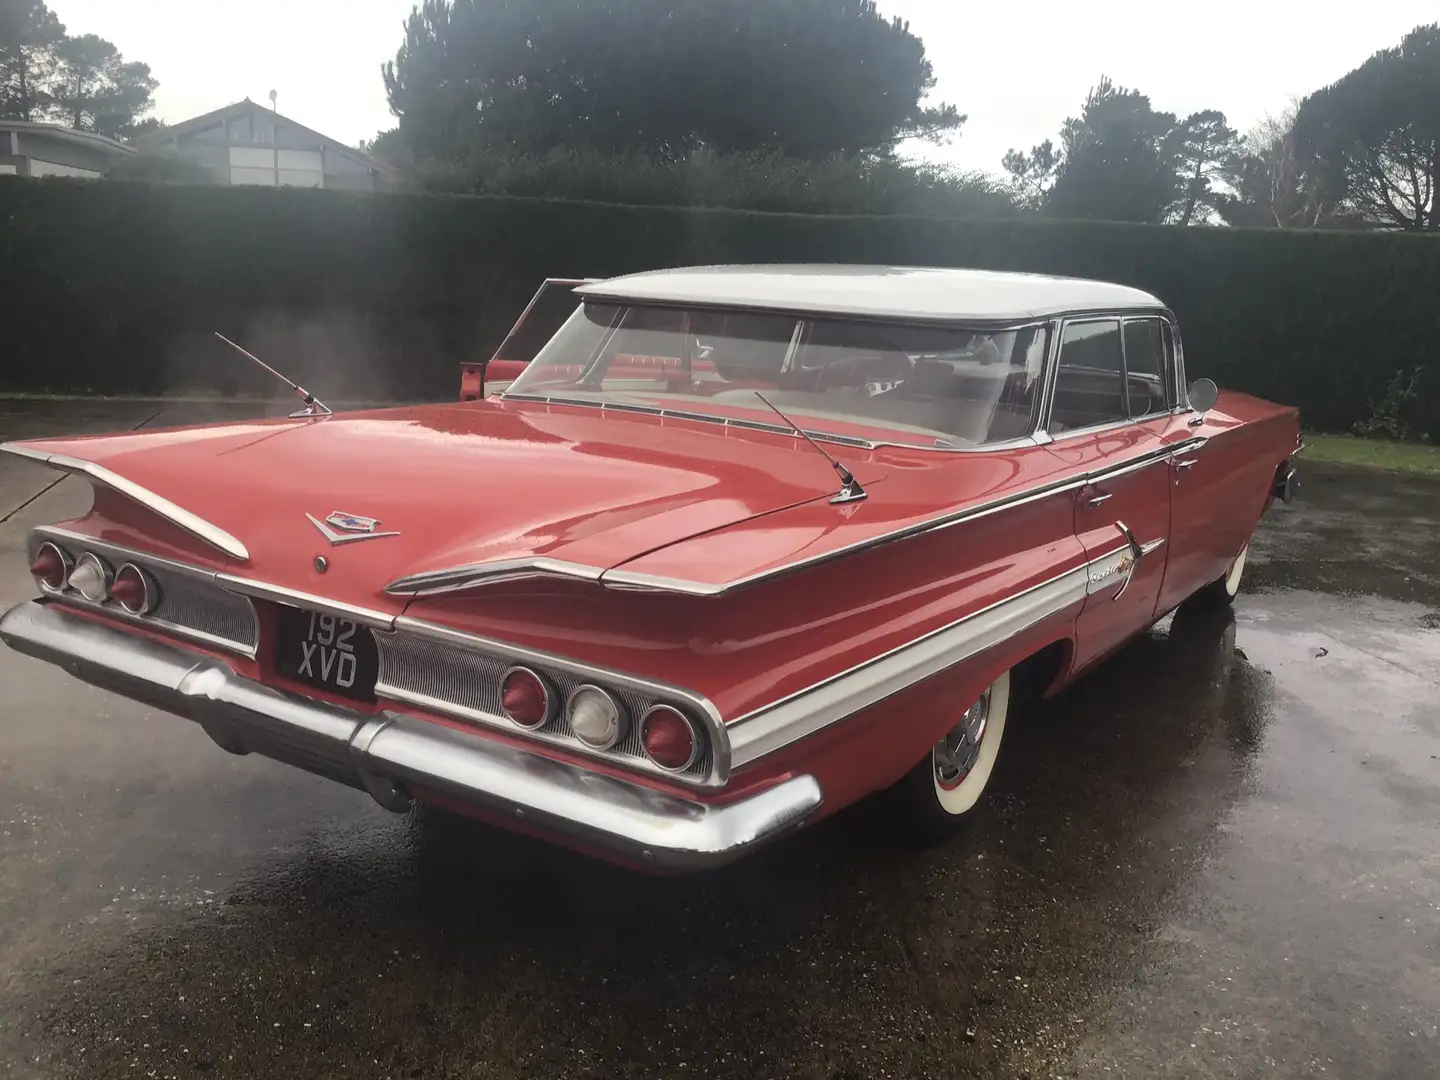 Chevrolet Impala automatic, power steering, working aircon, superb Piros - 1